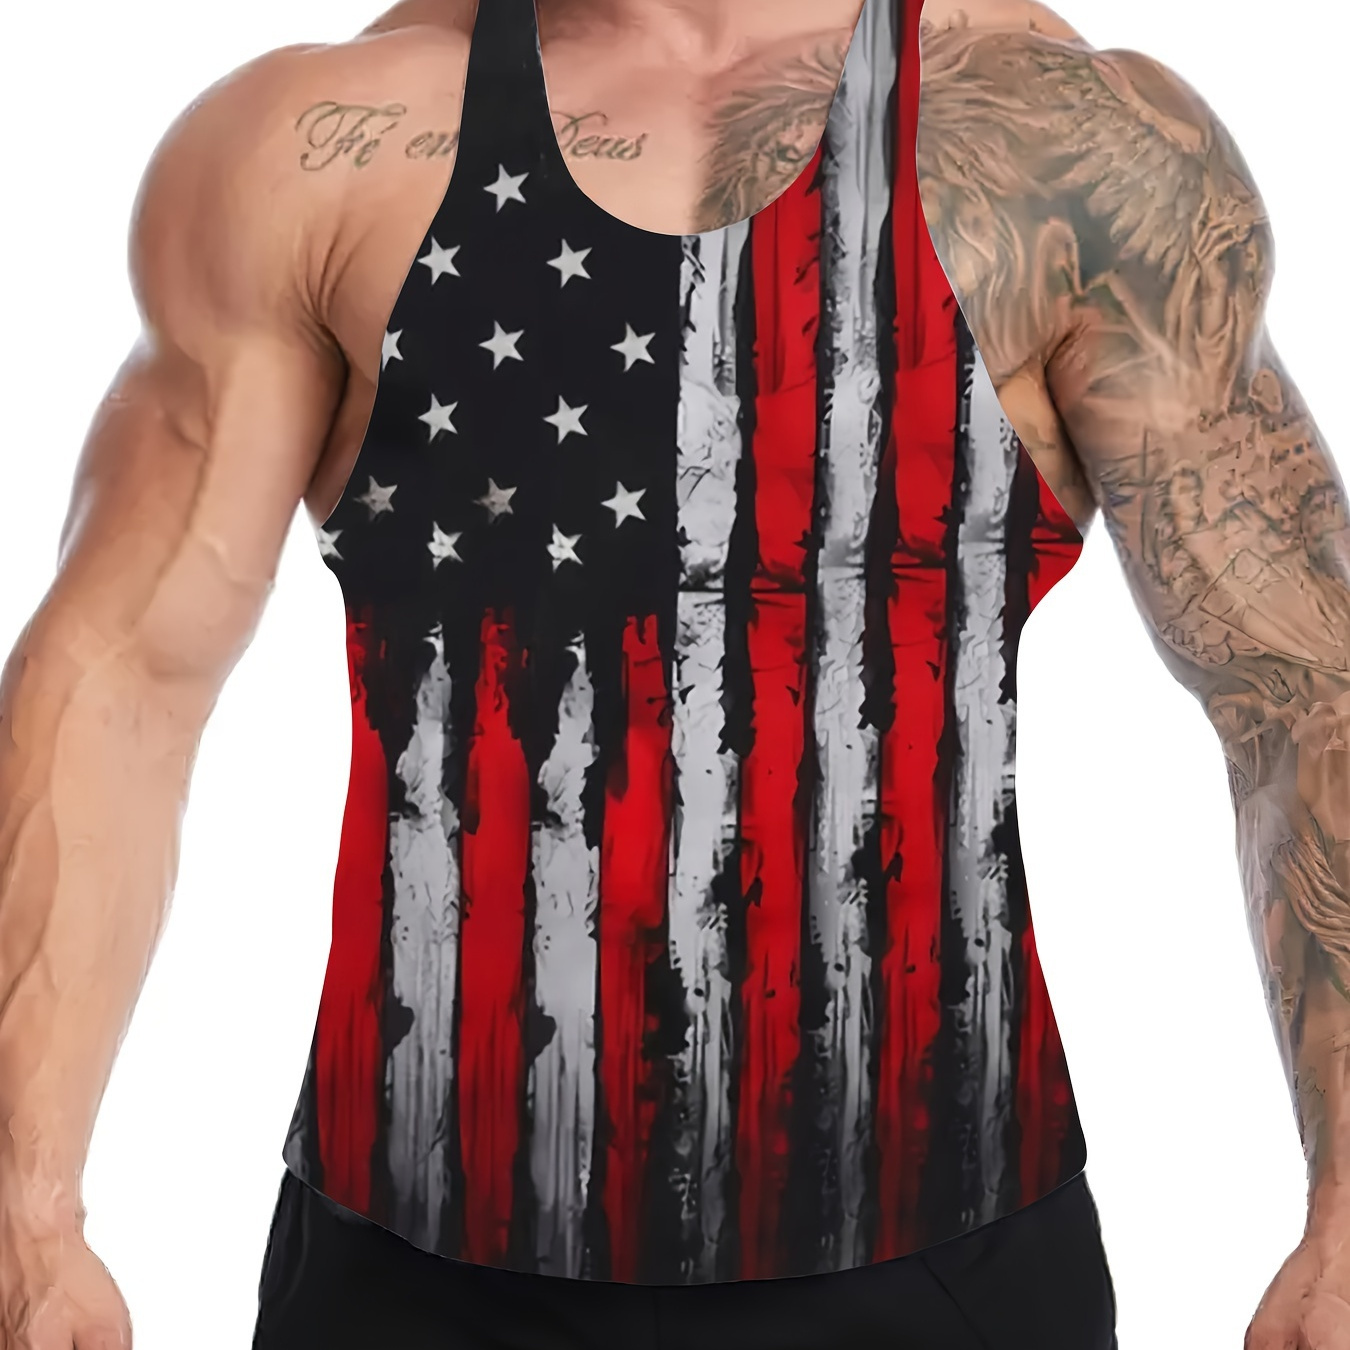 

American Flag Print Summer Men's Quick Dry Moisture-wicking Breathable Tank Tops, Athletic Gym Bodybuilding Sports Sleeveless Shirts, For Running Training, Men's Clothing